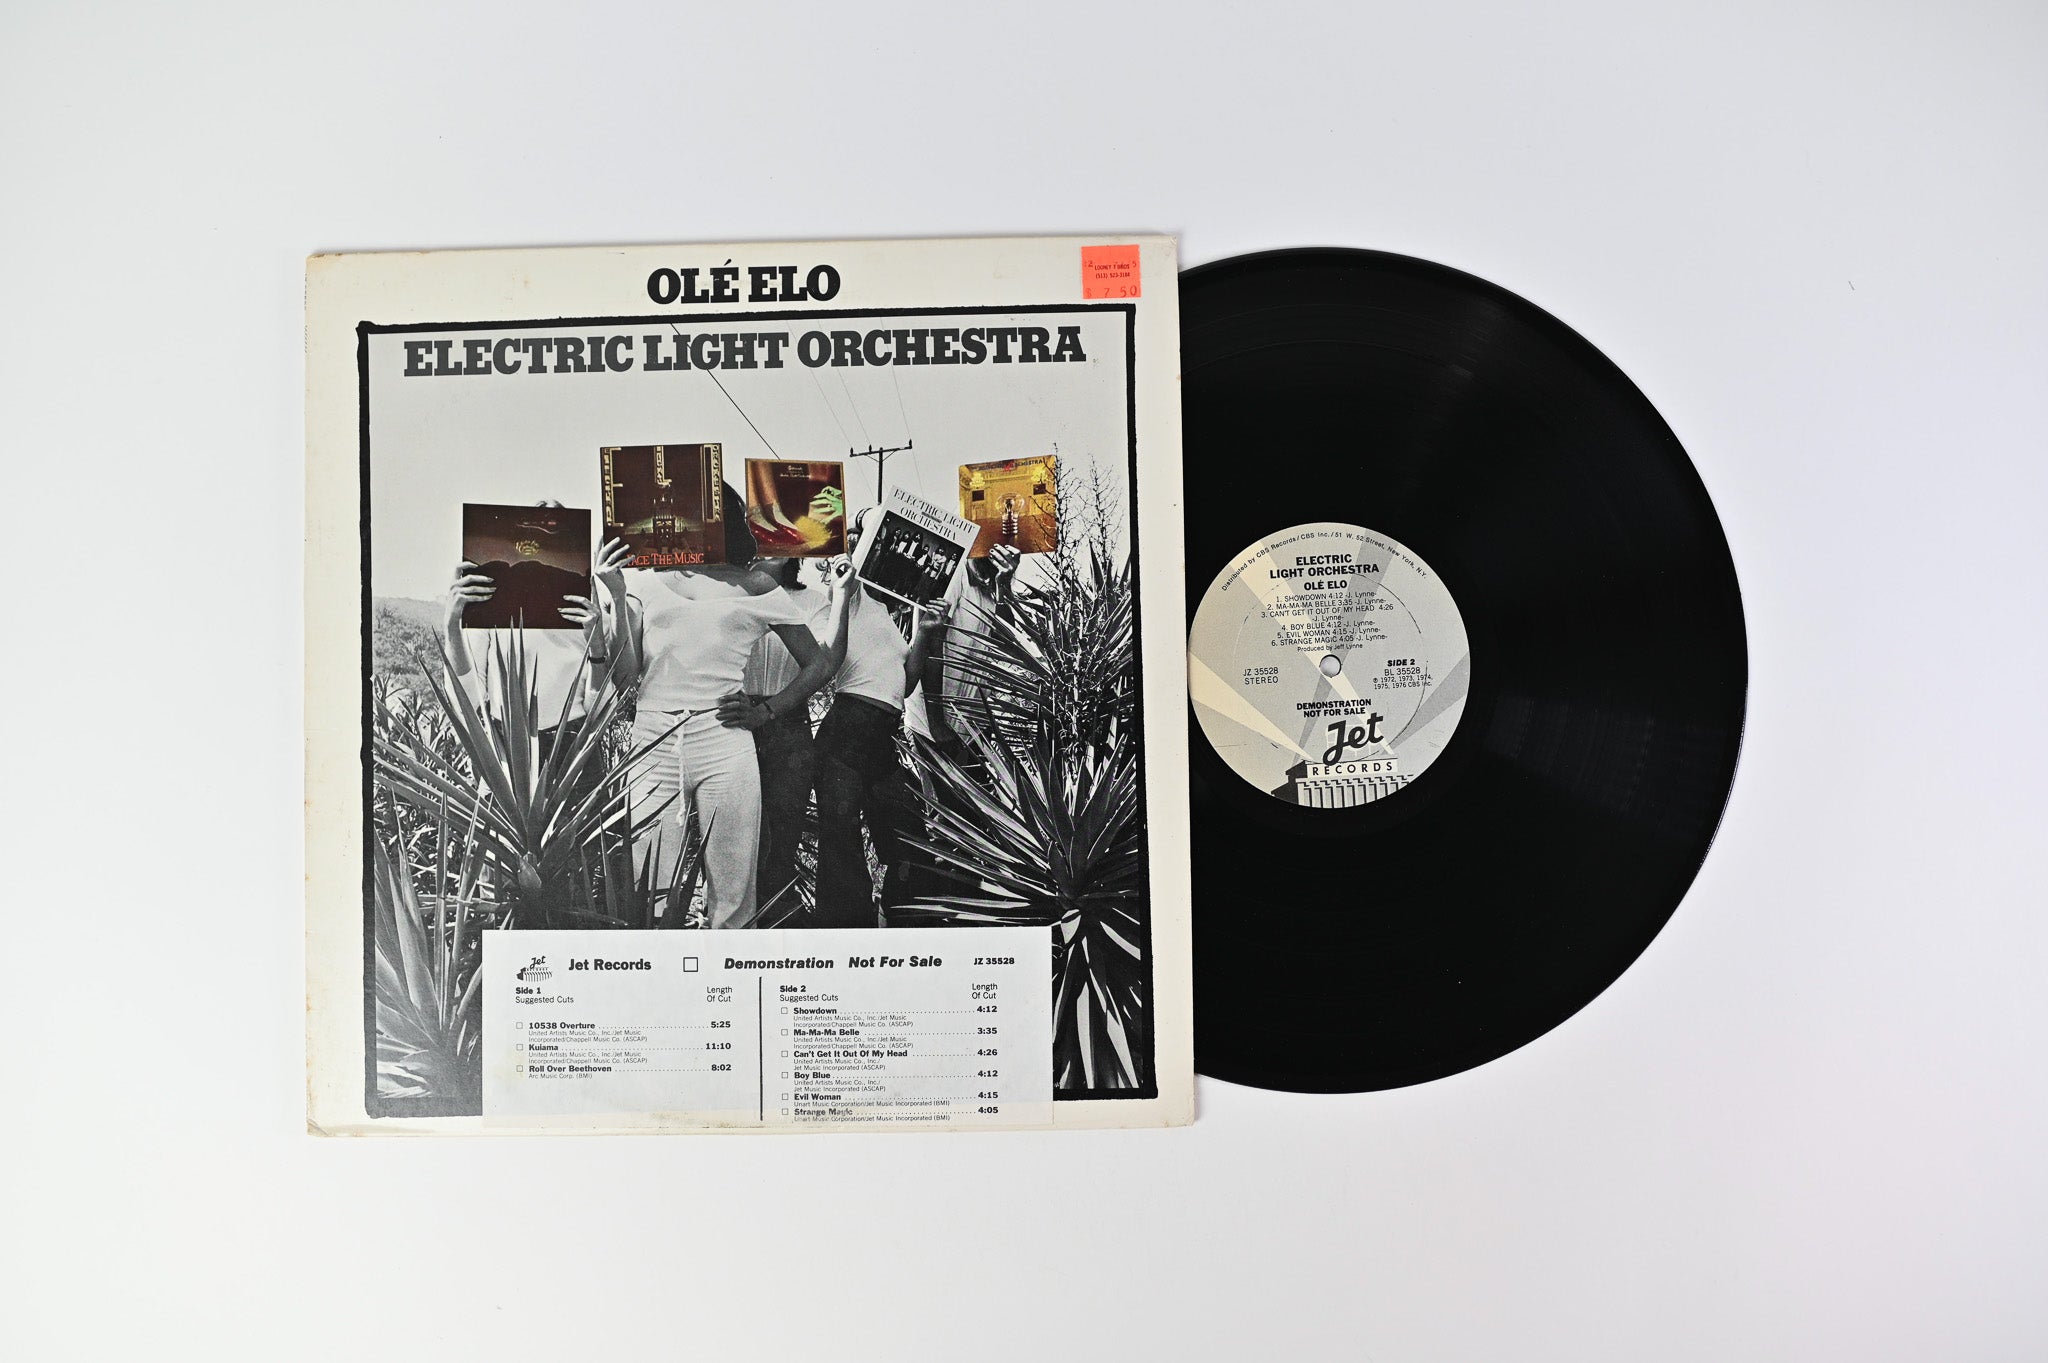 Electric Light Orchestra - Olé ELO on Jet Reissue Promo